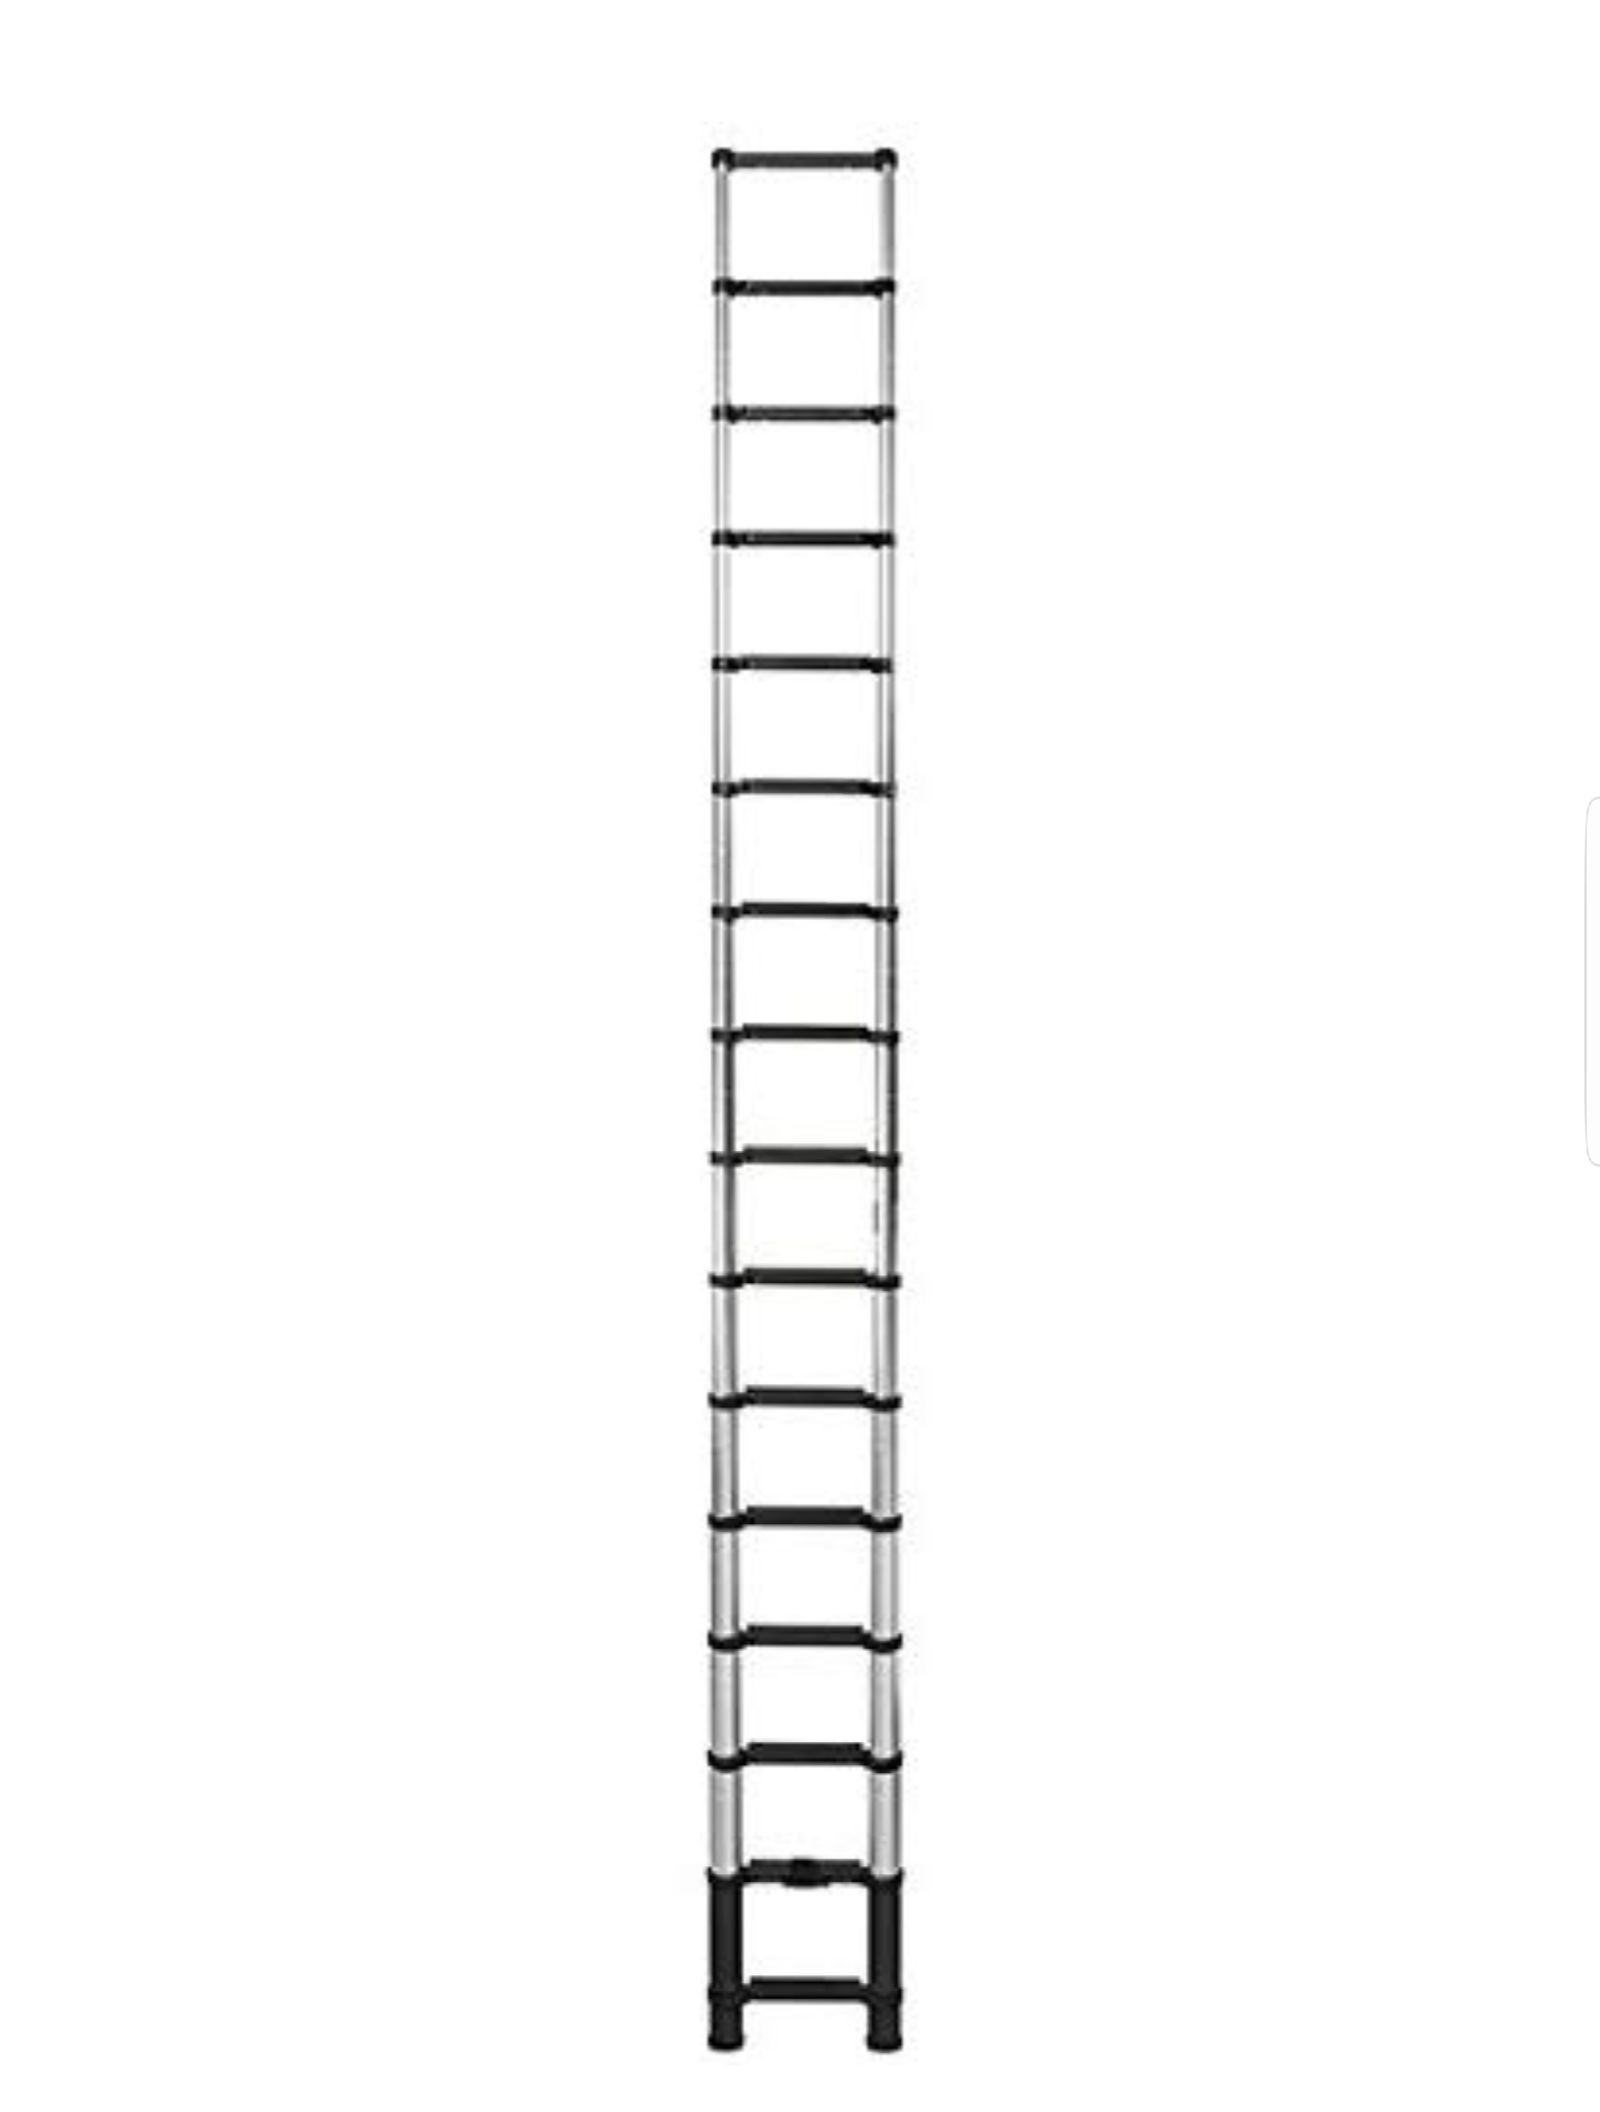 Illustration for article titled So Im trying to find a ladder suited for a very specific task